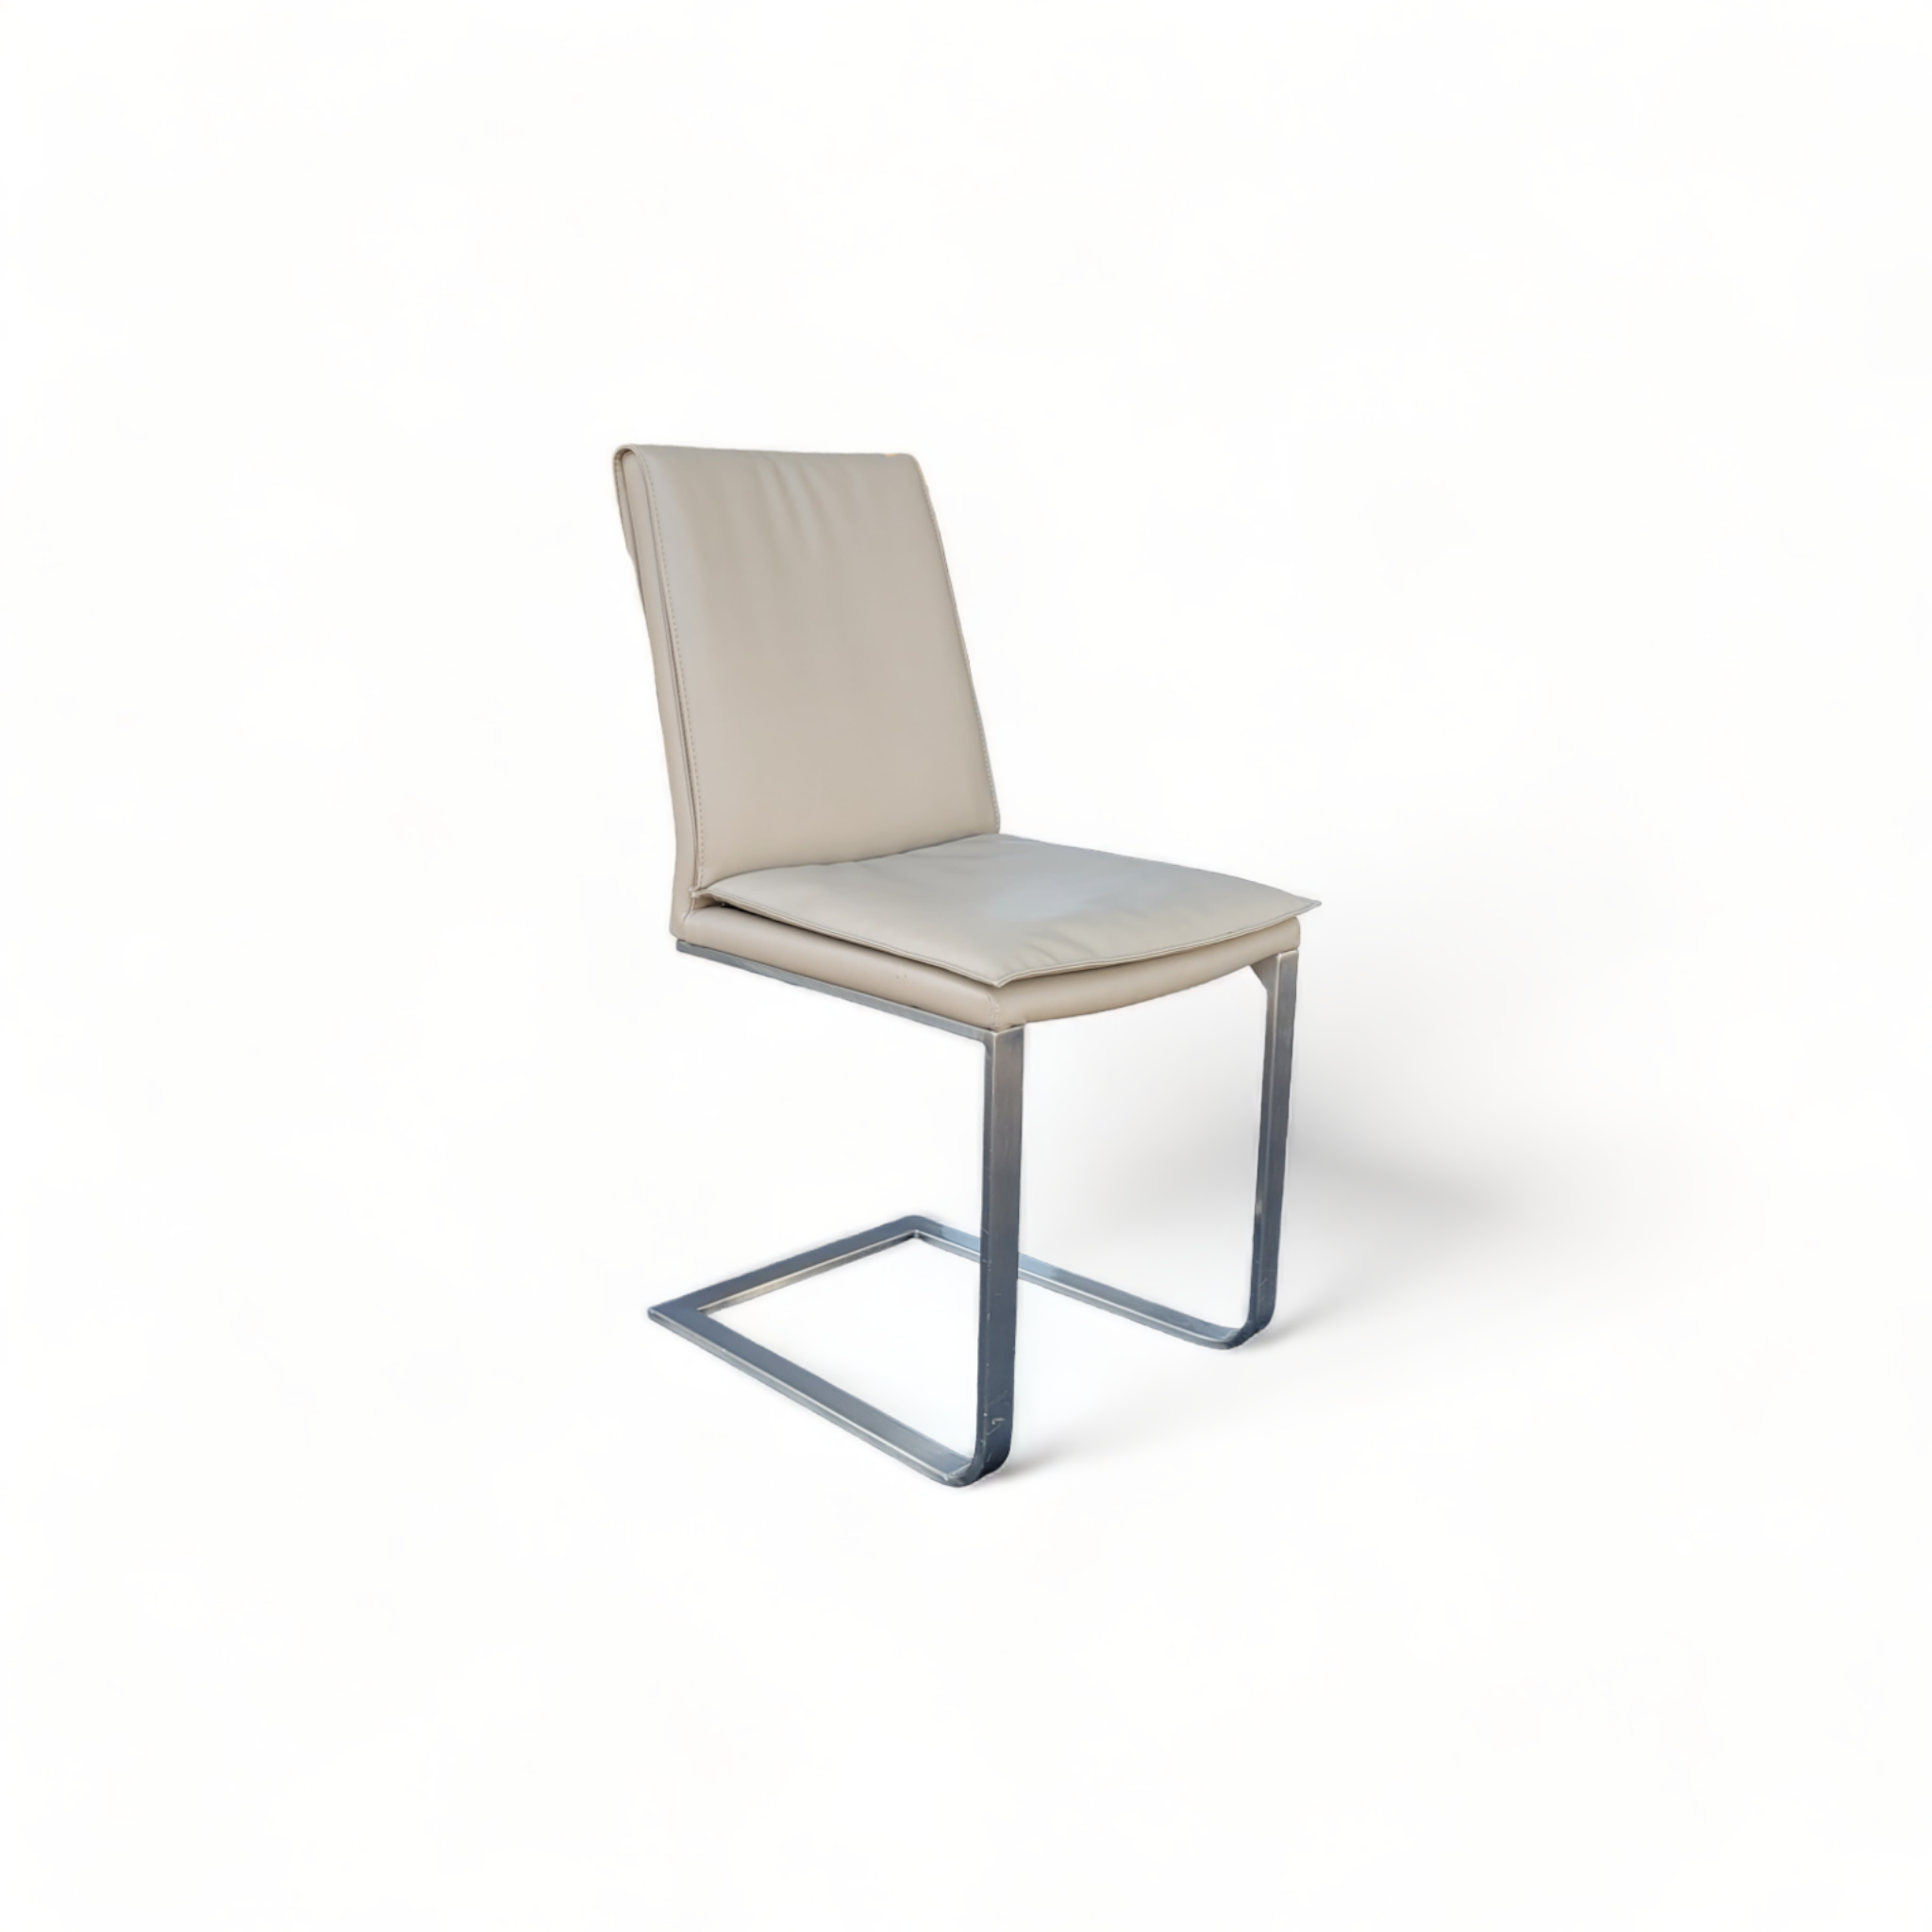 Rave Caffelatte Dining Chair (only 4)